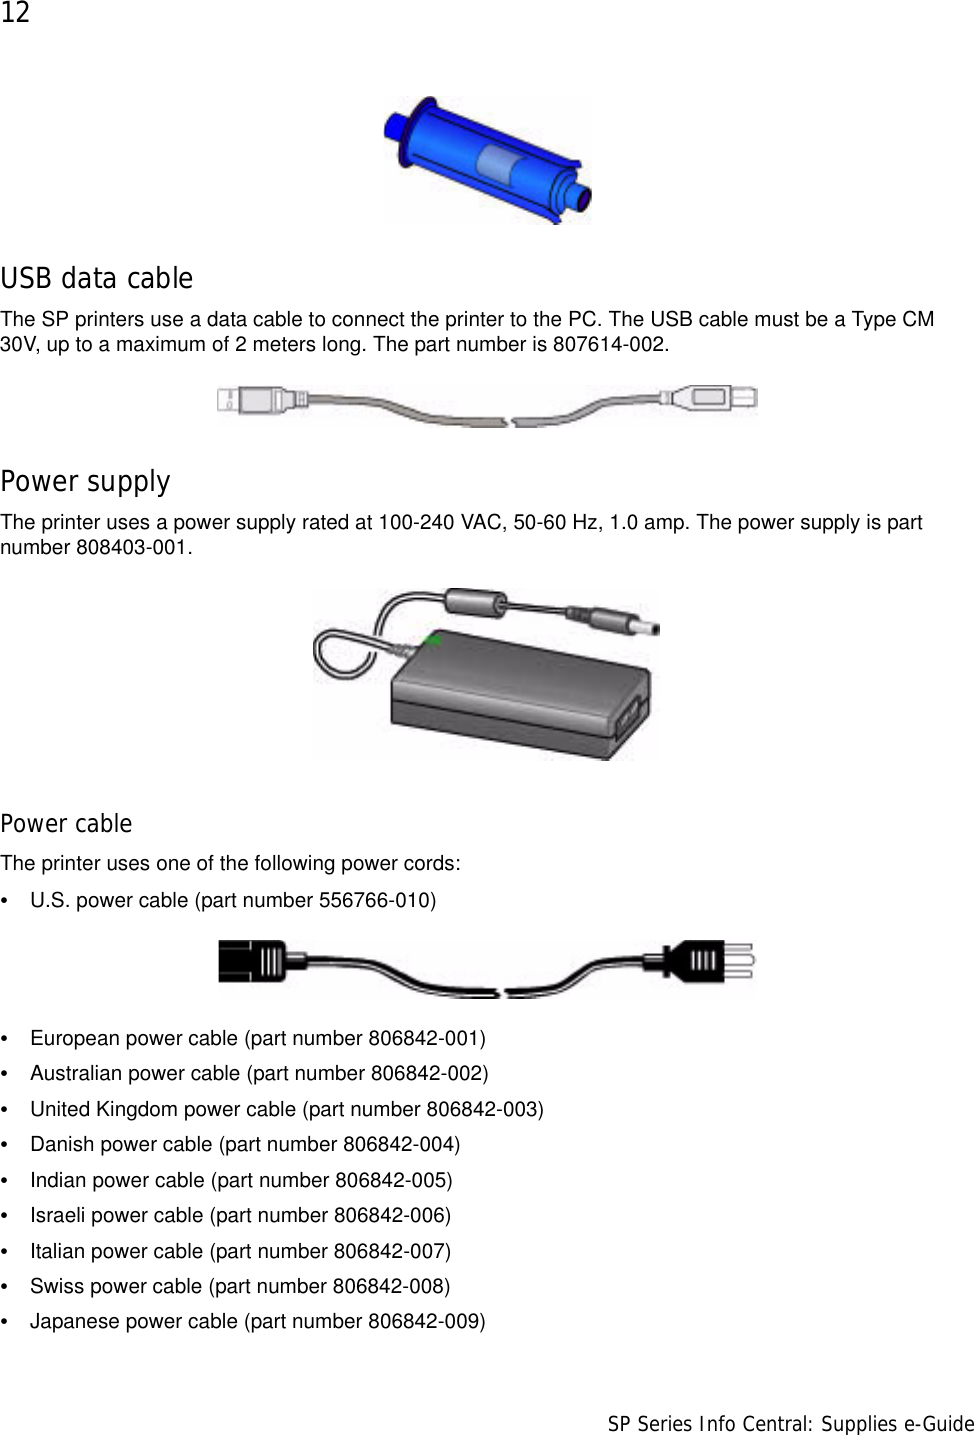 12                      SP Series Info Central: Supplies e-GuideUSB data cableThe SP printers use a data cable to connect the printer to the PC. The USB cable must be a Type CM 30V, up to a maximum of 2 meters long. The part number is 807614-002.Power supplyThe printer uses a power supply rated at 100-240 VAC, 50-60 Hz, 1.0 amp. The power supply is part number 808403-001.Power cableThe printer uses one of the following power cords: •U.S. power cable (part number 556766-010)•European power cable (part number 806842-001)•Australian power cable (part number 806842-002)•United Kingdom power cable (part number 806842-003)•Danish power cable (part number 806842-004)•Indian power cable (part number 806842-005)•Israeli power cable (part number 806842-006)•Italian power cable (part number 806842-007)•Swiss power cable (part number 806842-008)•Japanese power cable (part number 806842-009)